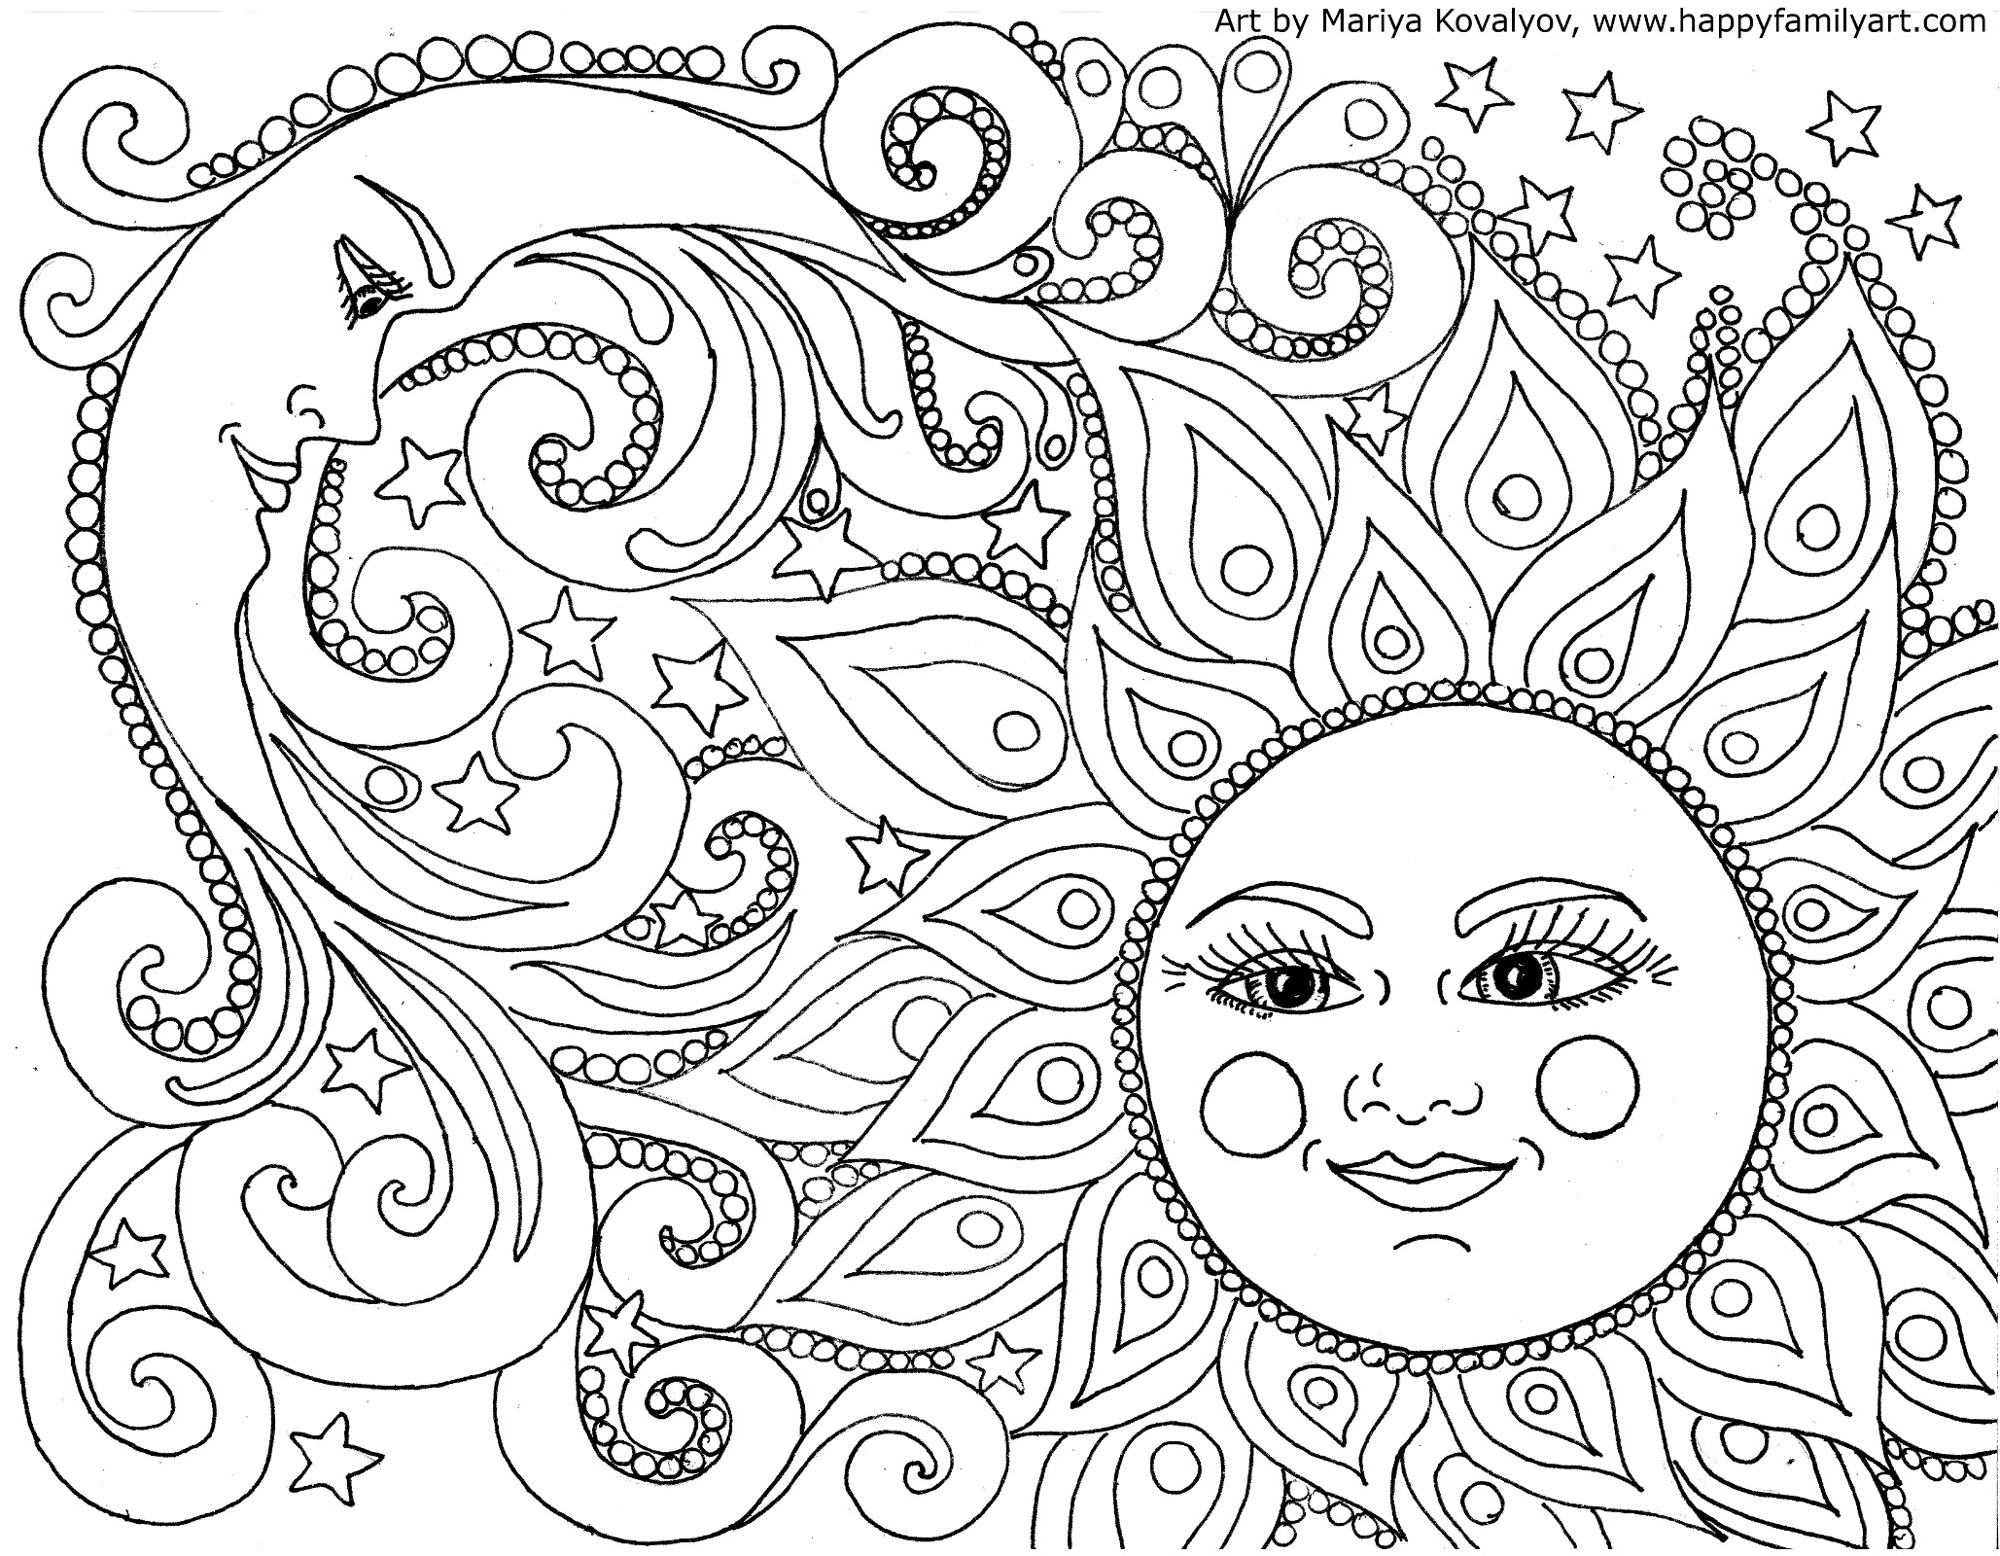 Download Happy Family Art Original And Fun Coloring Pages